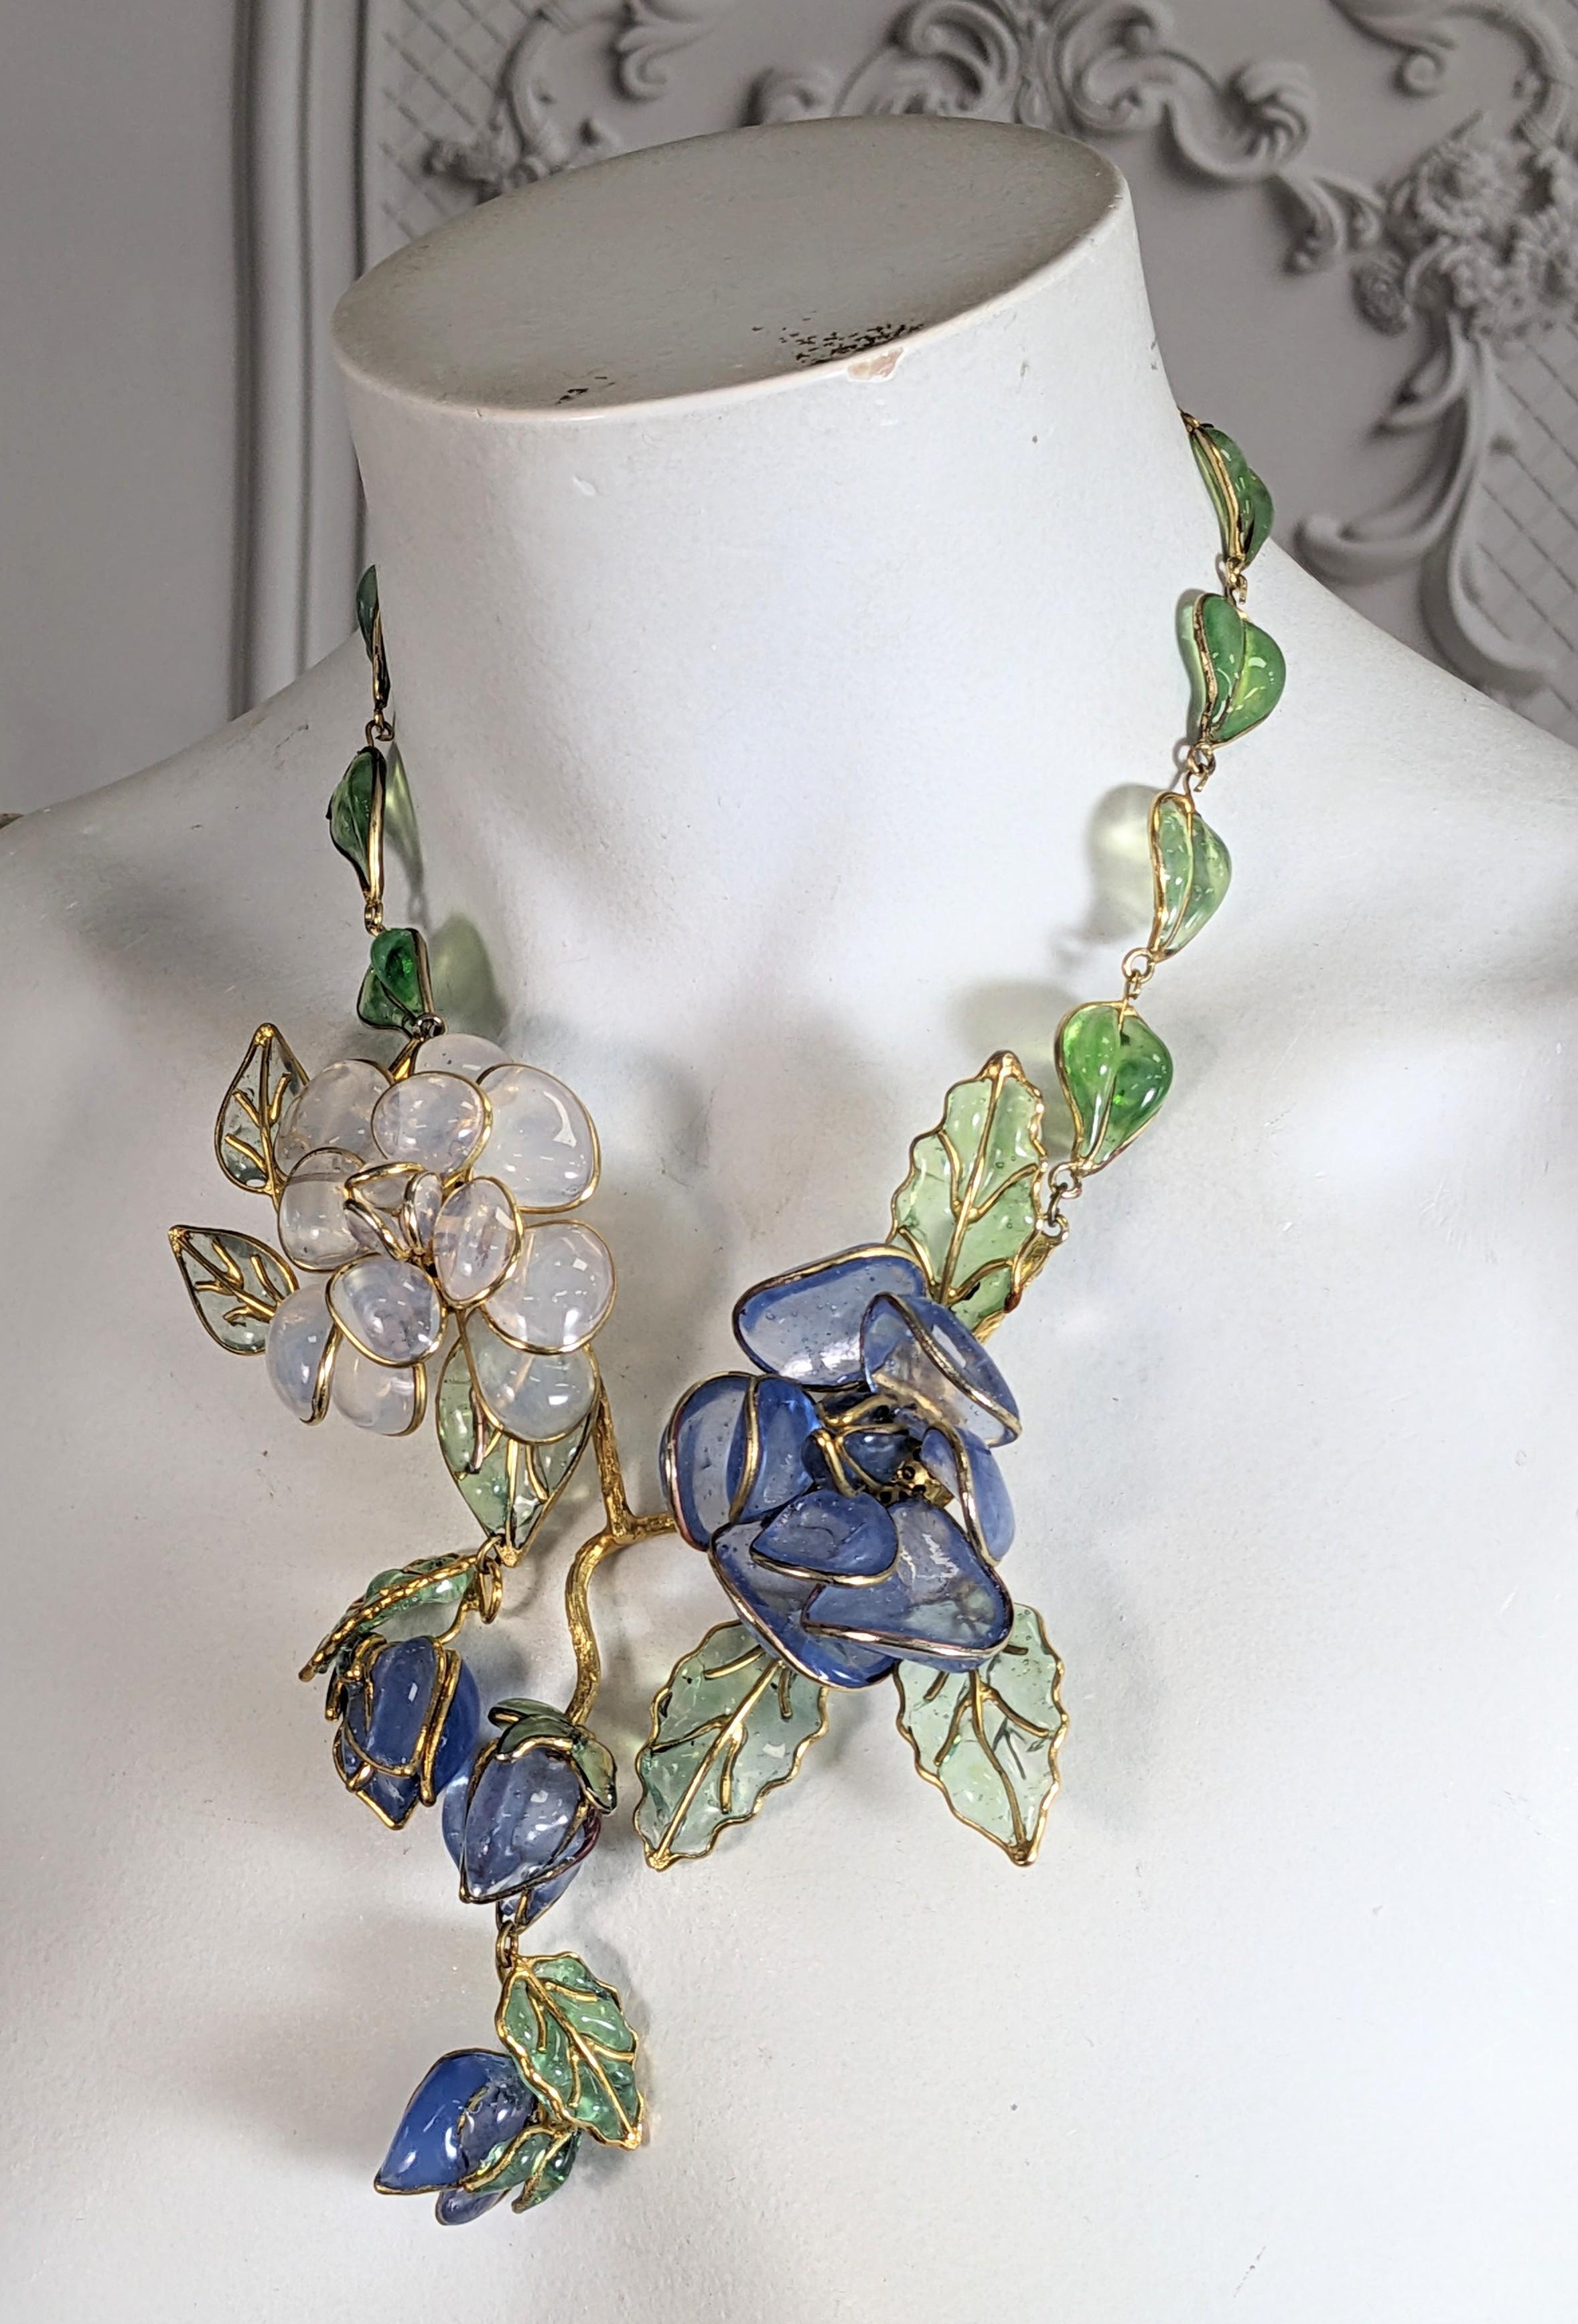  CoCo Chanel  Maison Gripoix Glass Enamel Flower Necklace In Excellent Condition For Sale In New York, NY